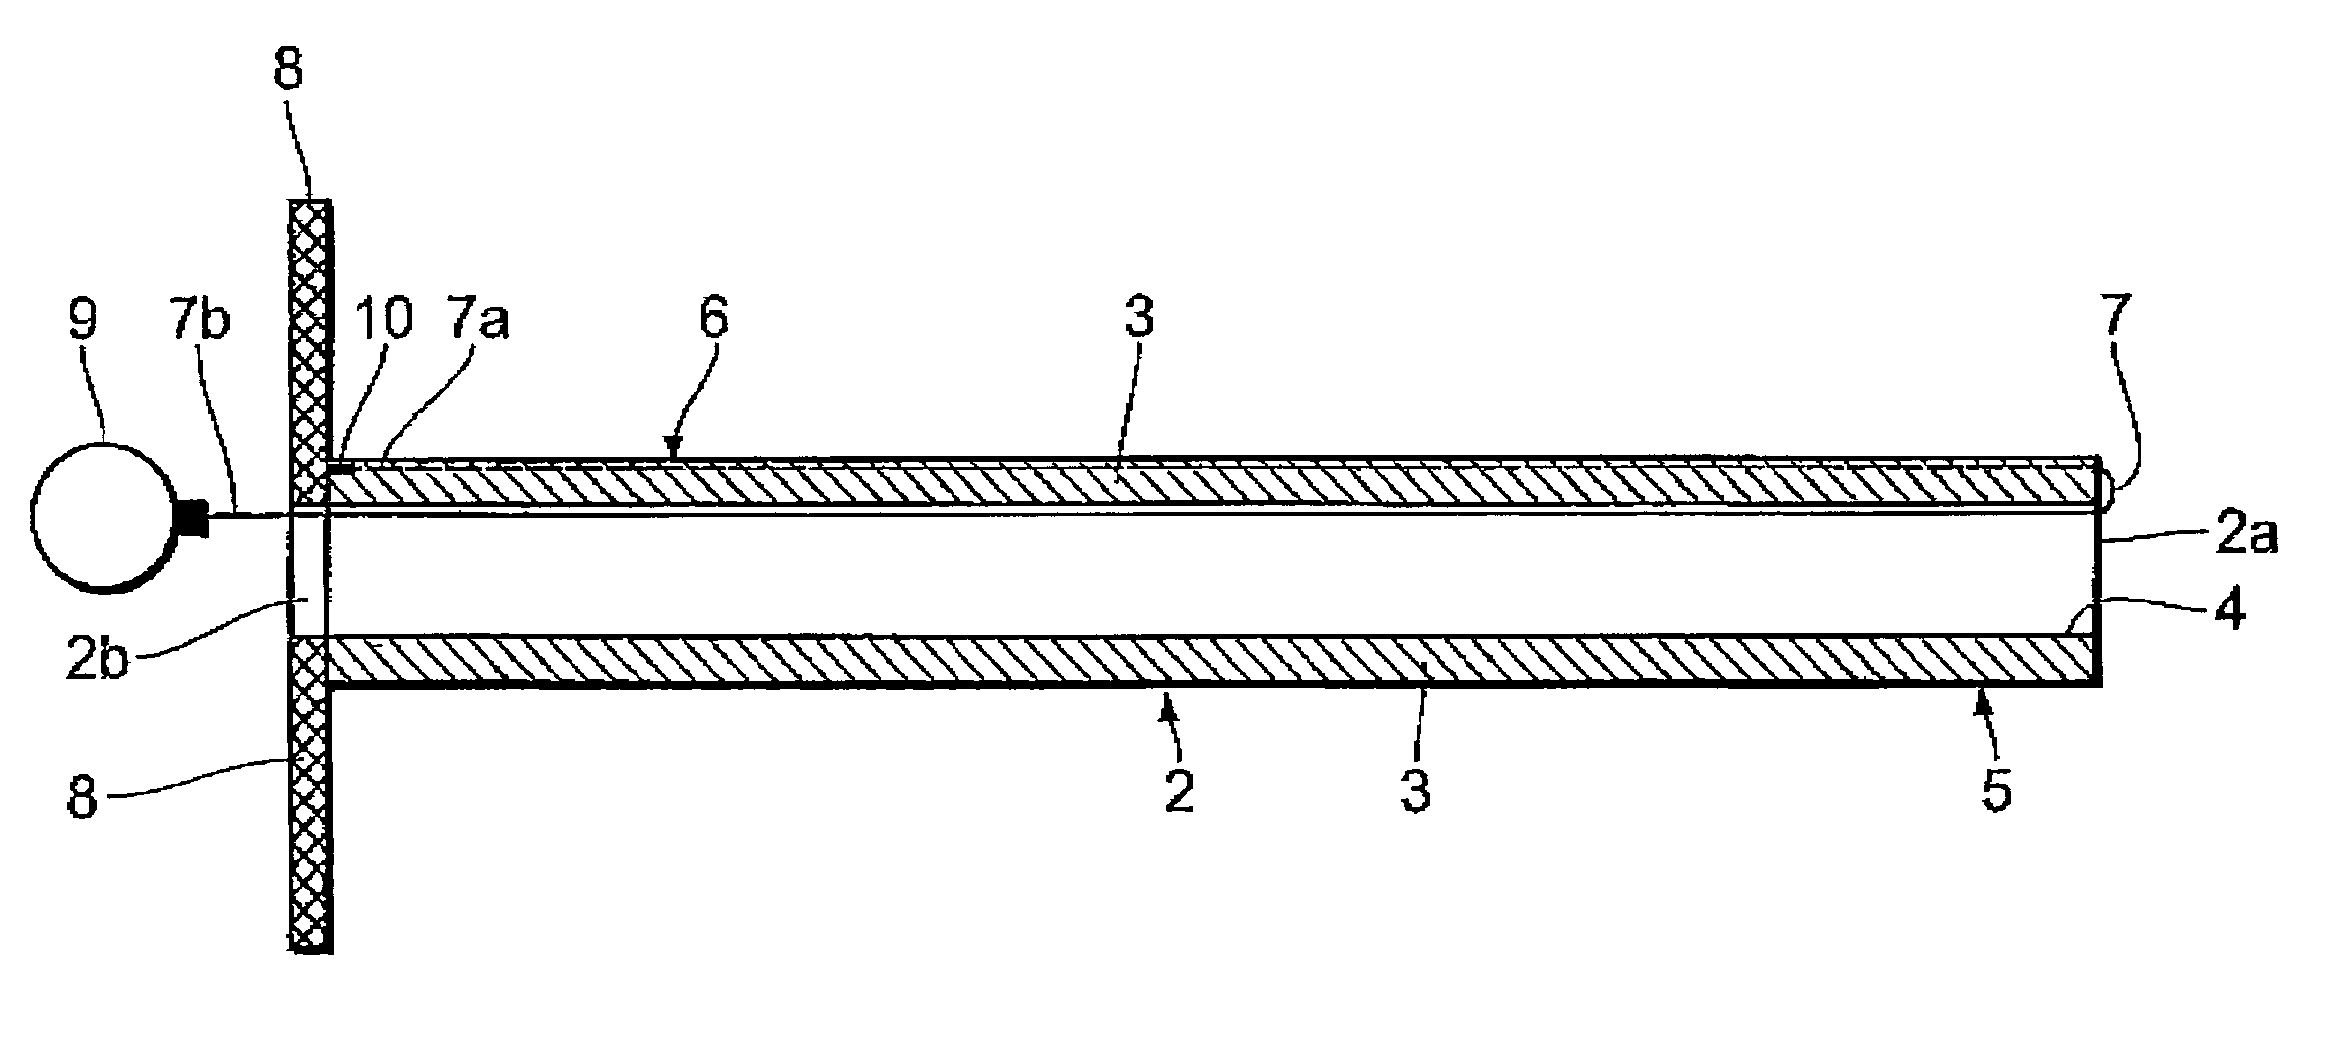 Device for implanting catheters